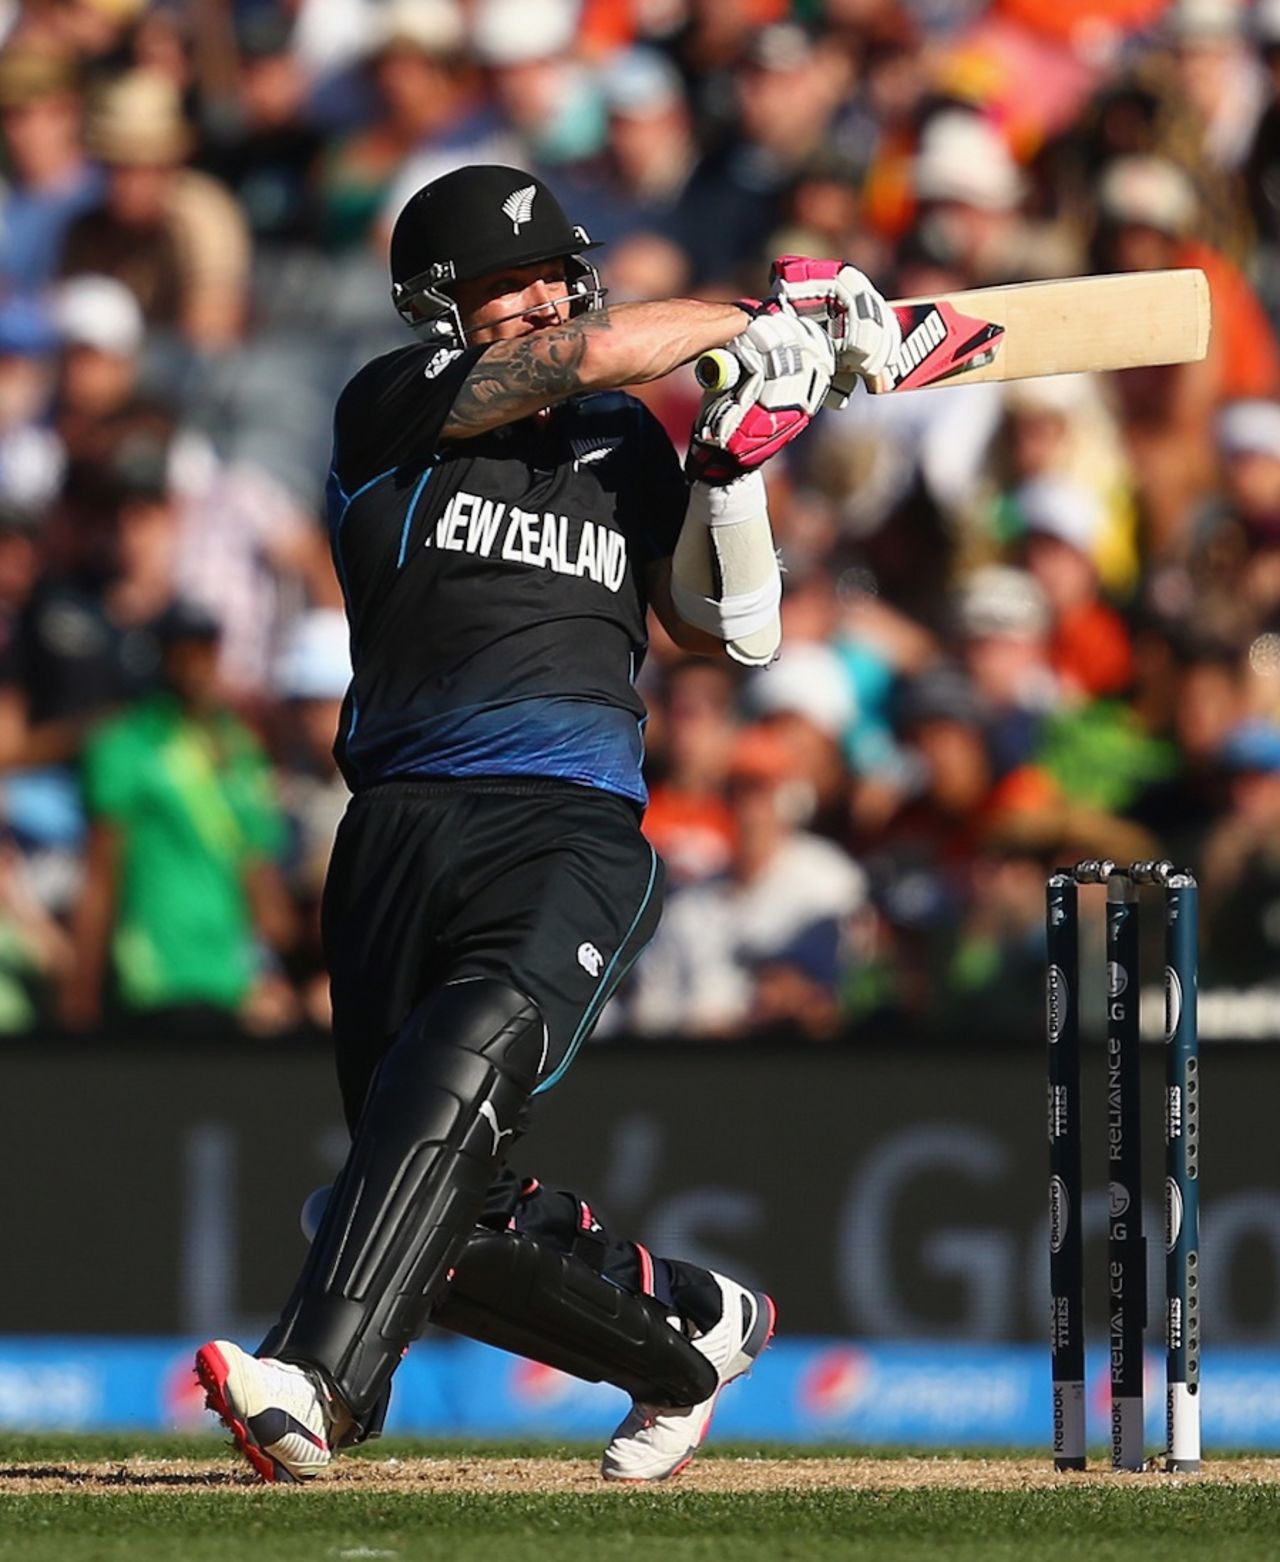 Brendon McCullum strapped on an arm-guard on his injured hand but continued attacking, New Zealand v Australia, World Cup 2015, Group A, Auckland, February 28, 2015